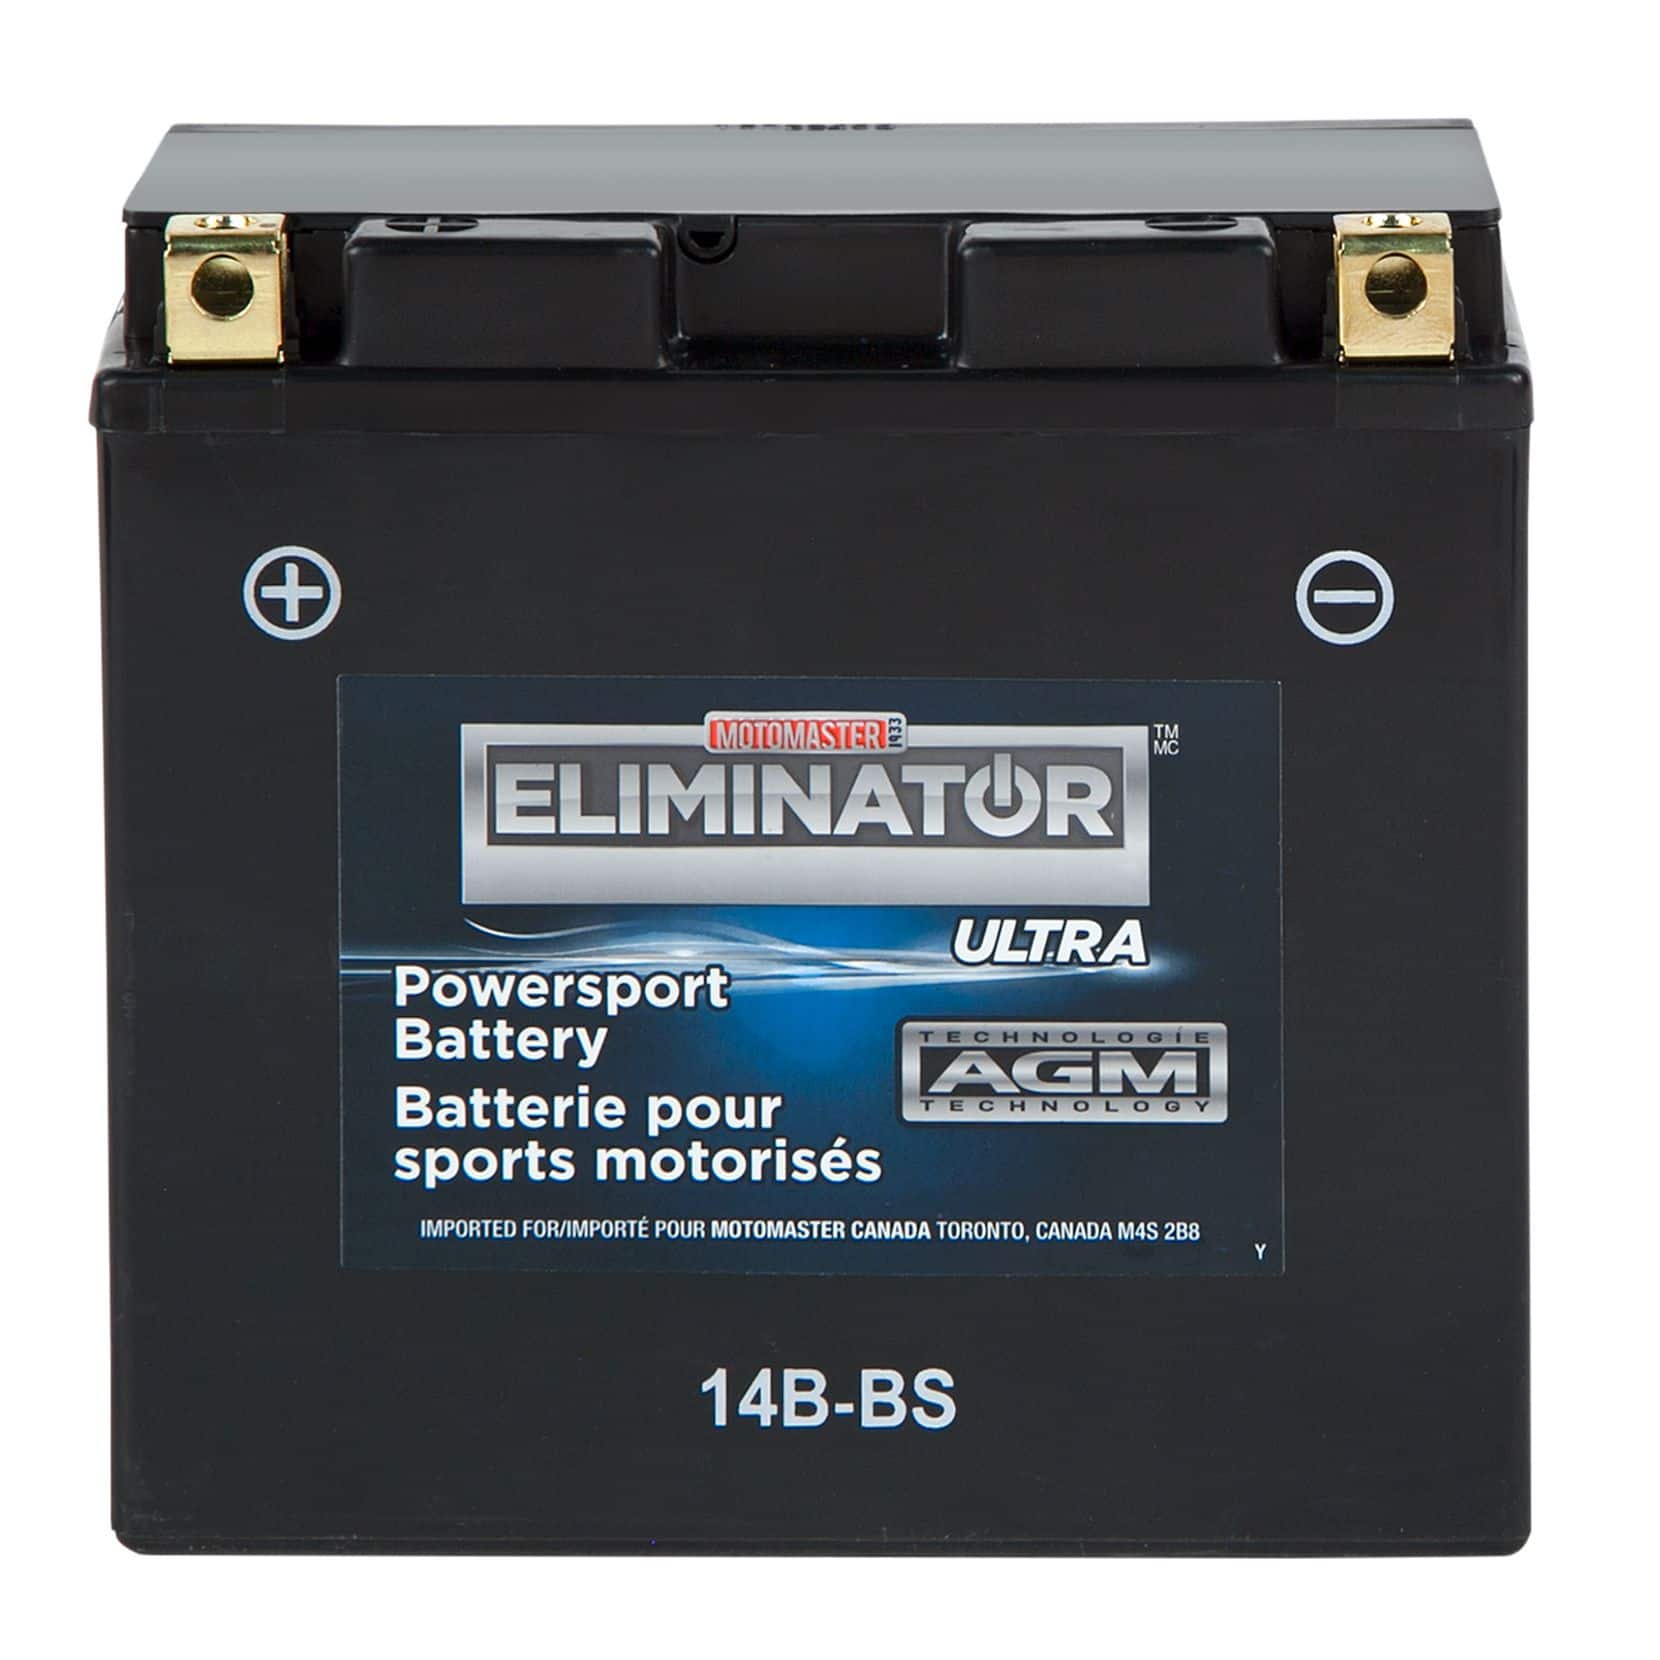 MOTOMASTER ELIMINATOR AGM Powersports Battery, 14-BS | Canadian Tire